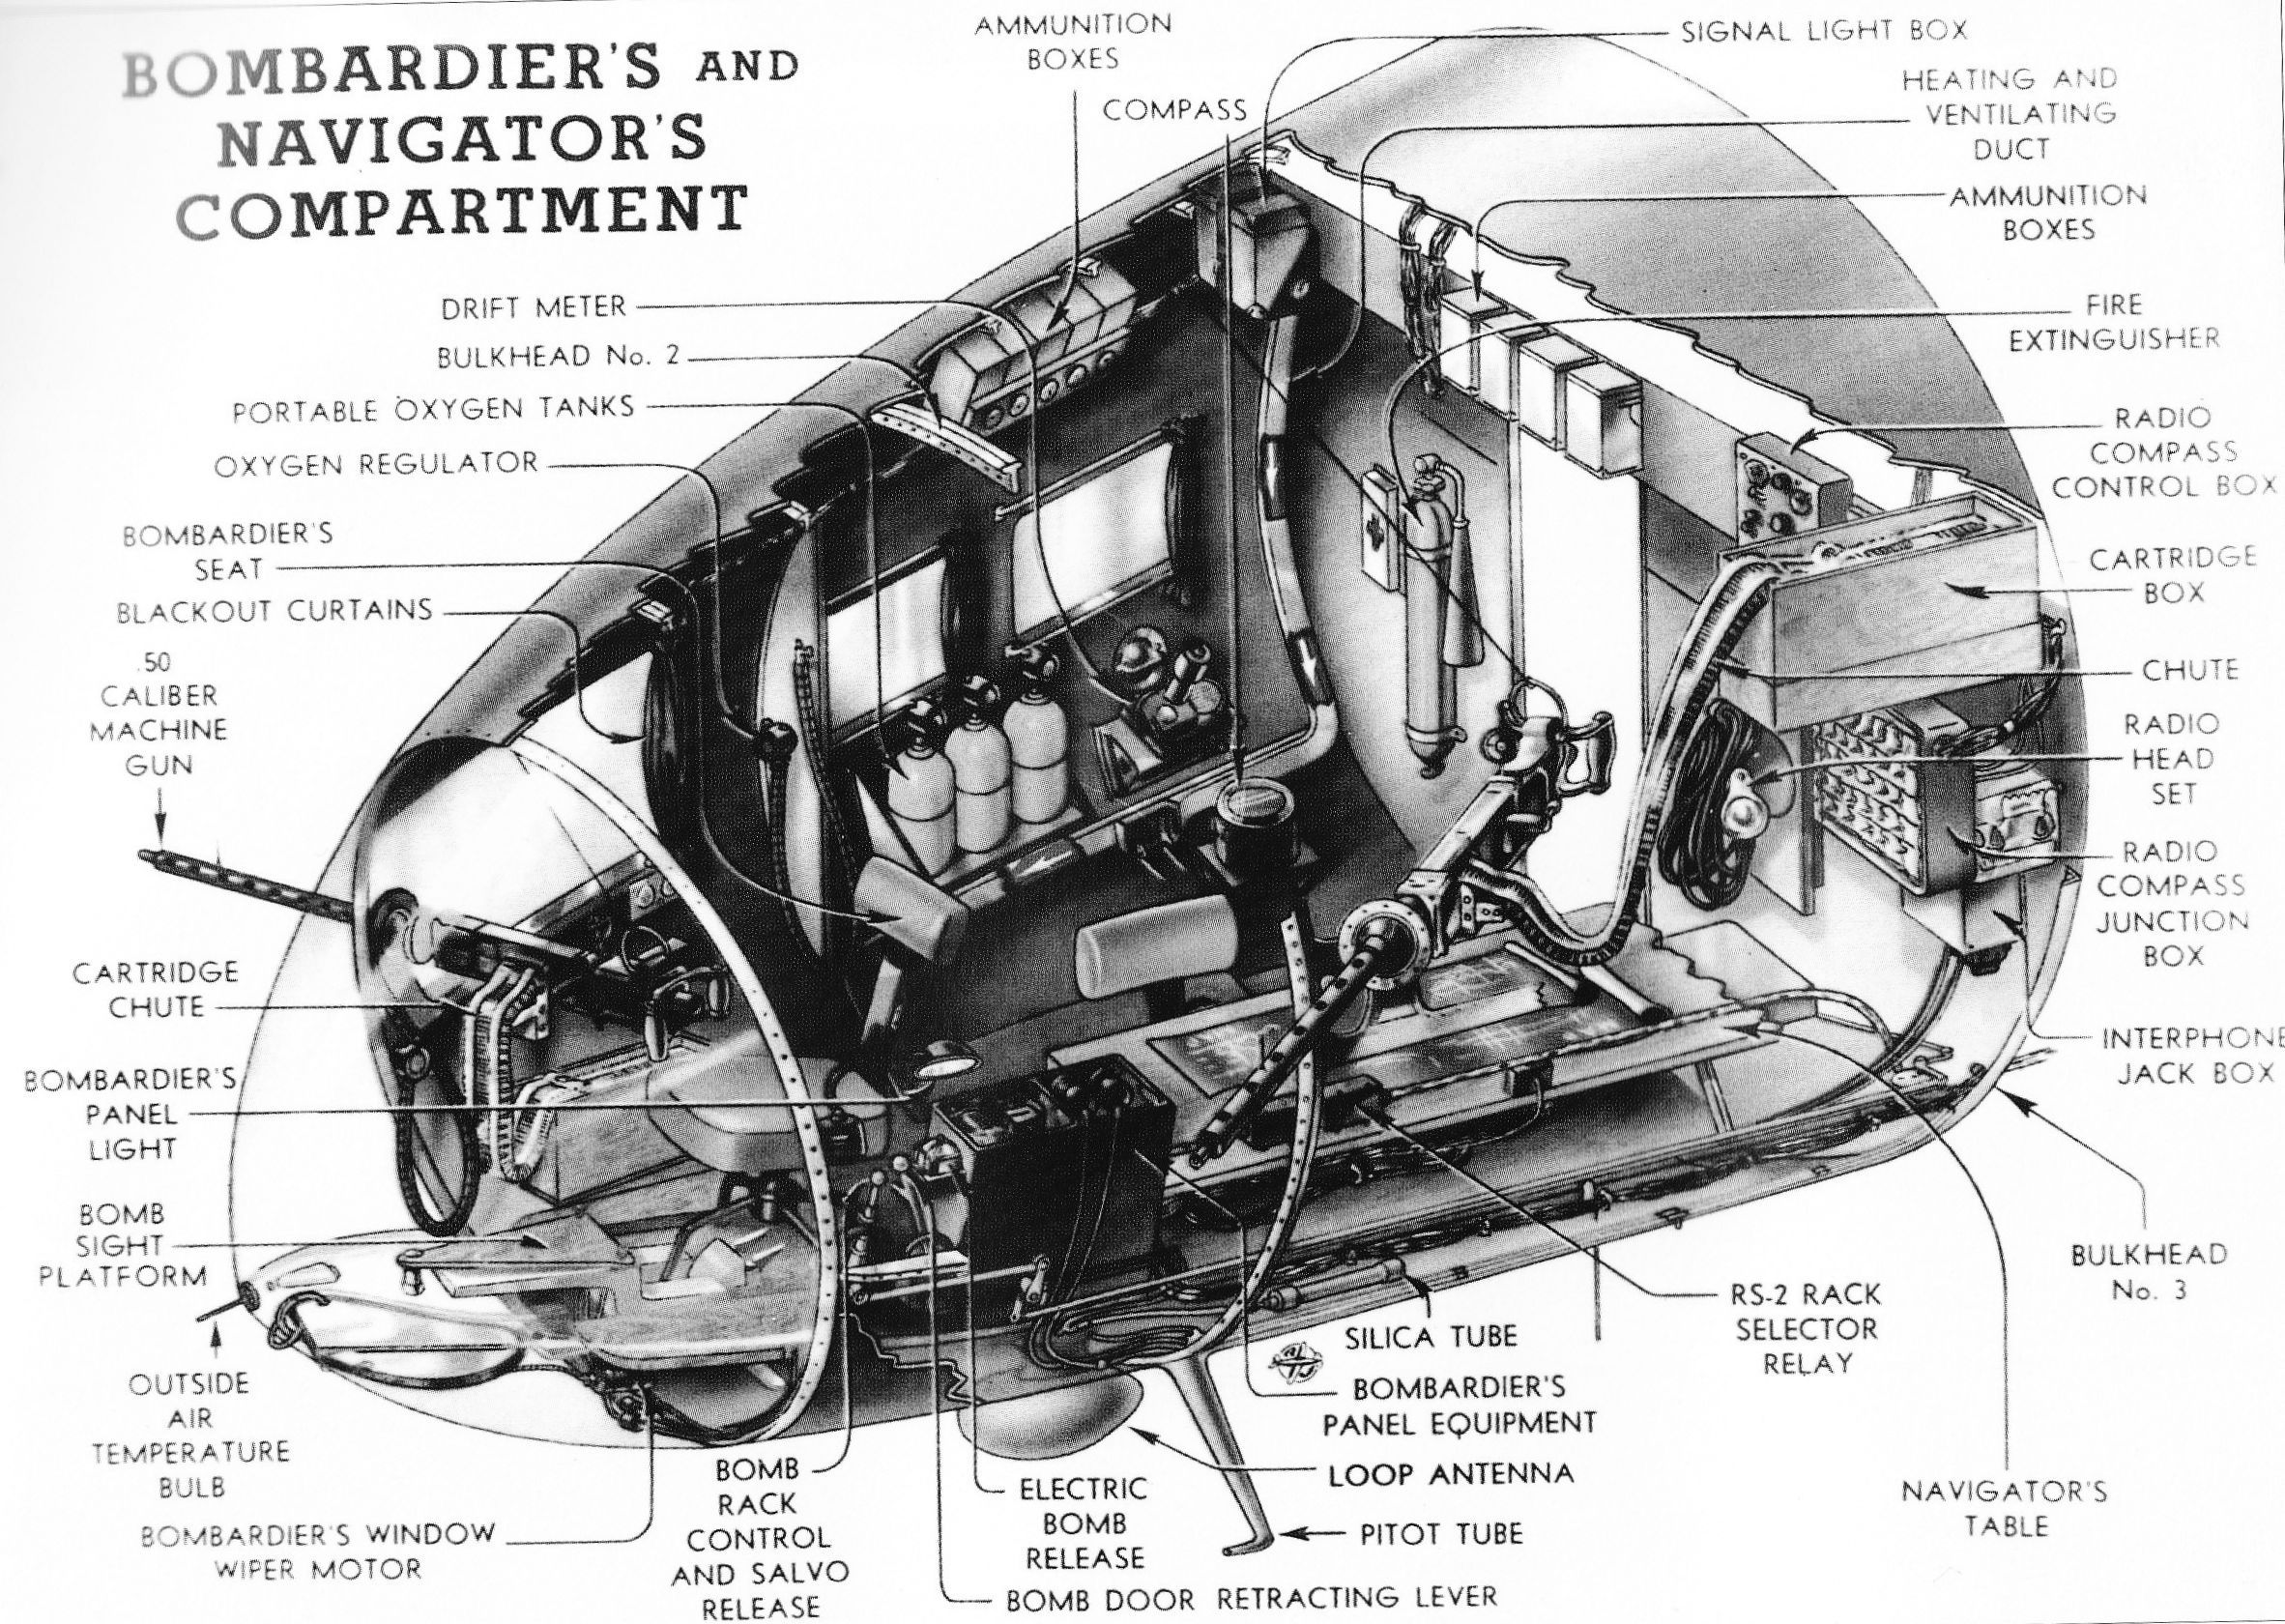 B-17_Bombardiers_compartment